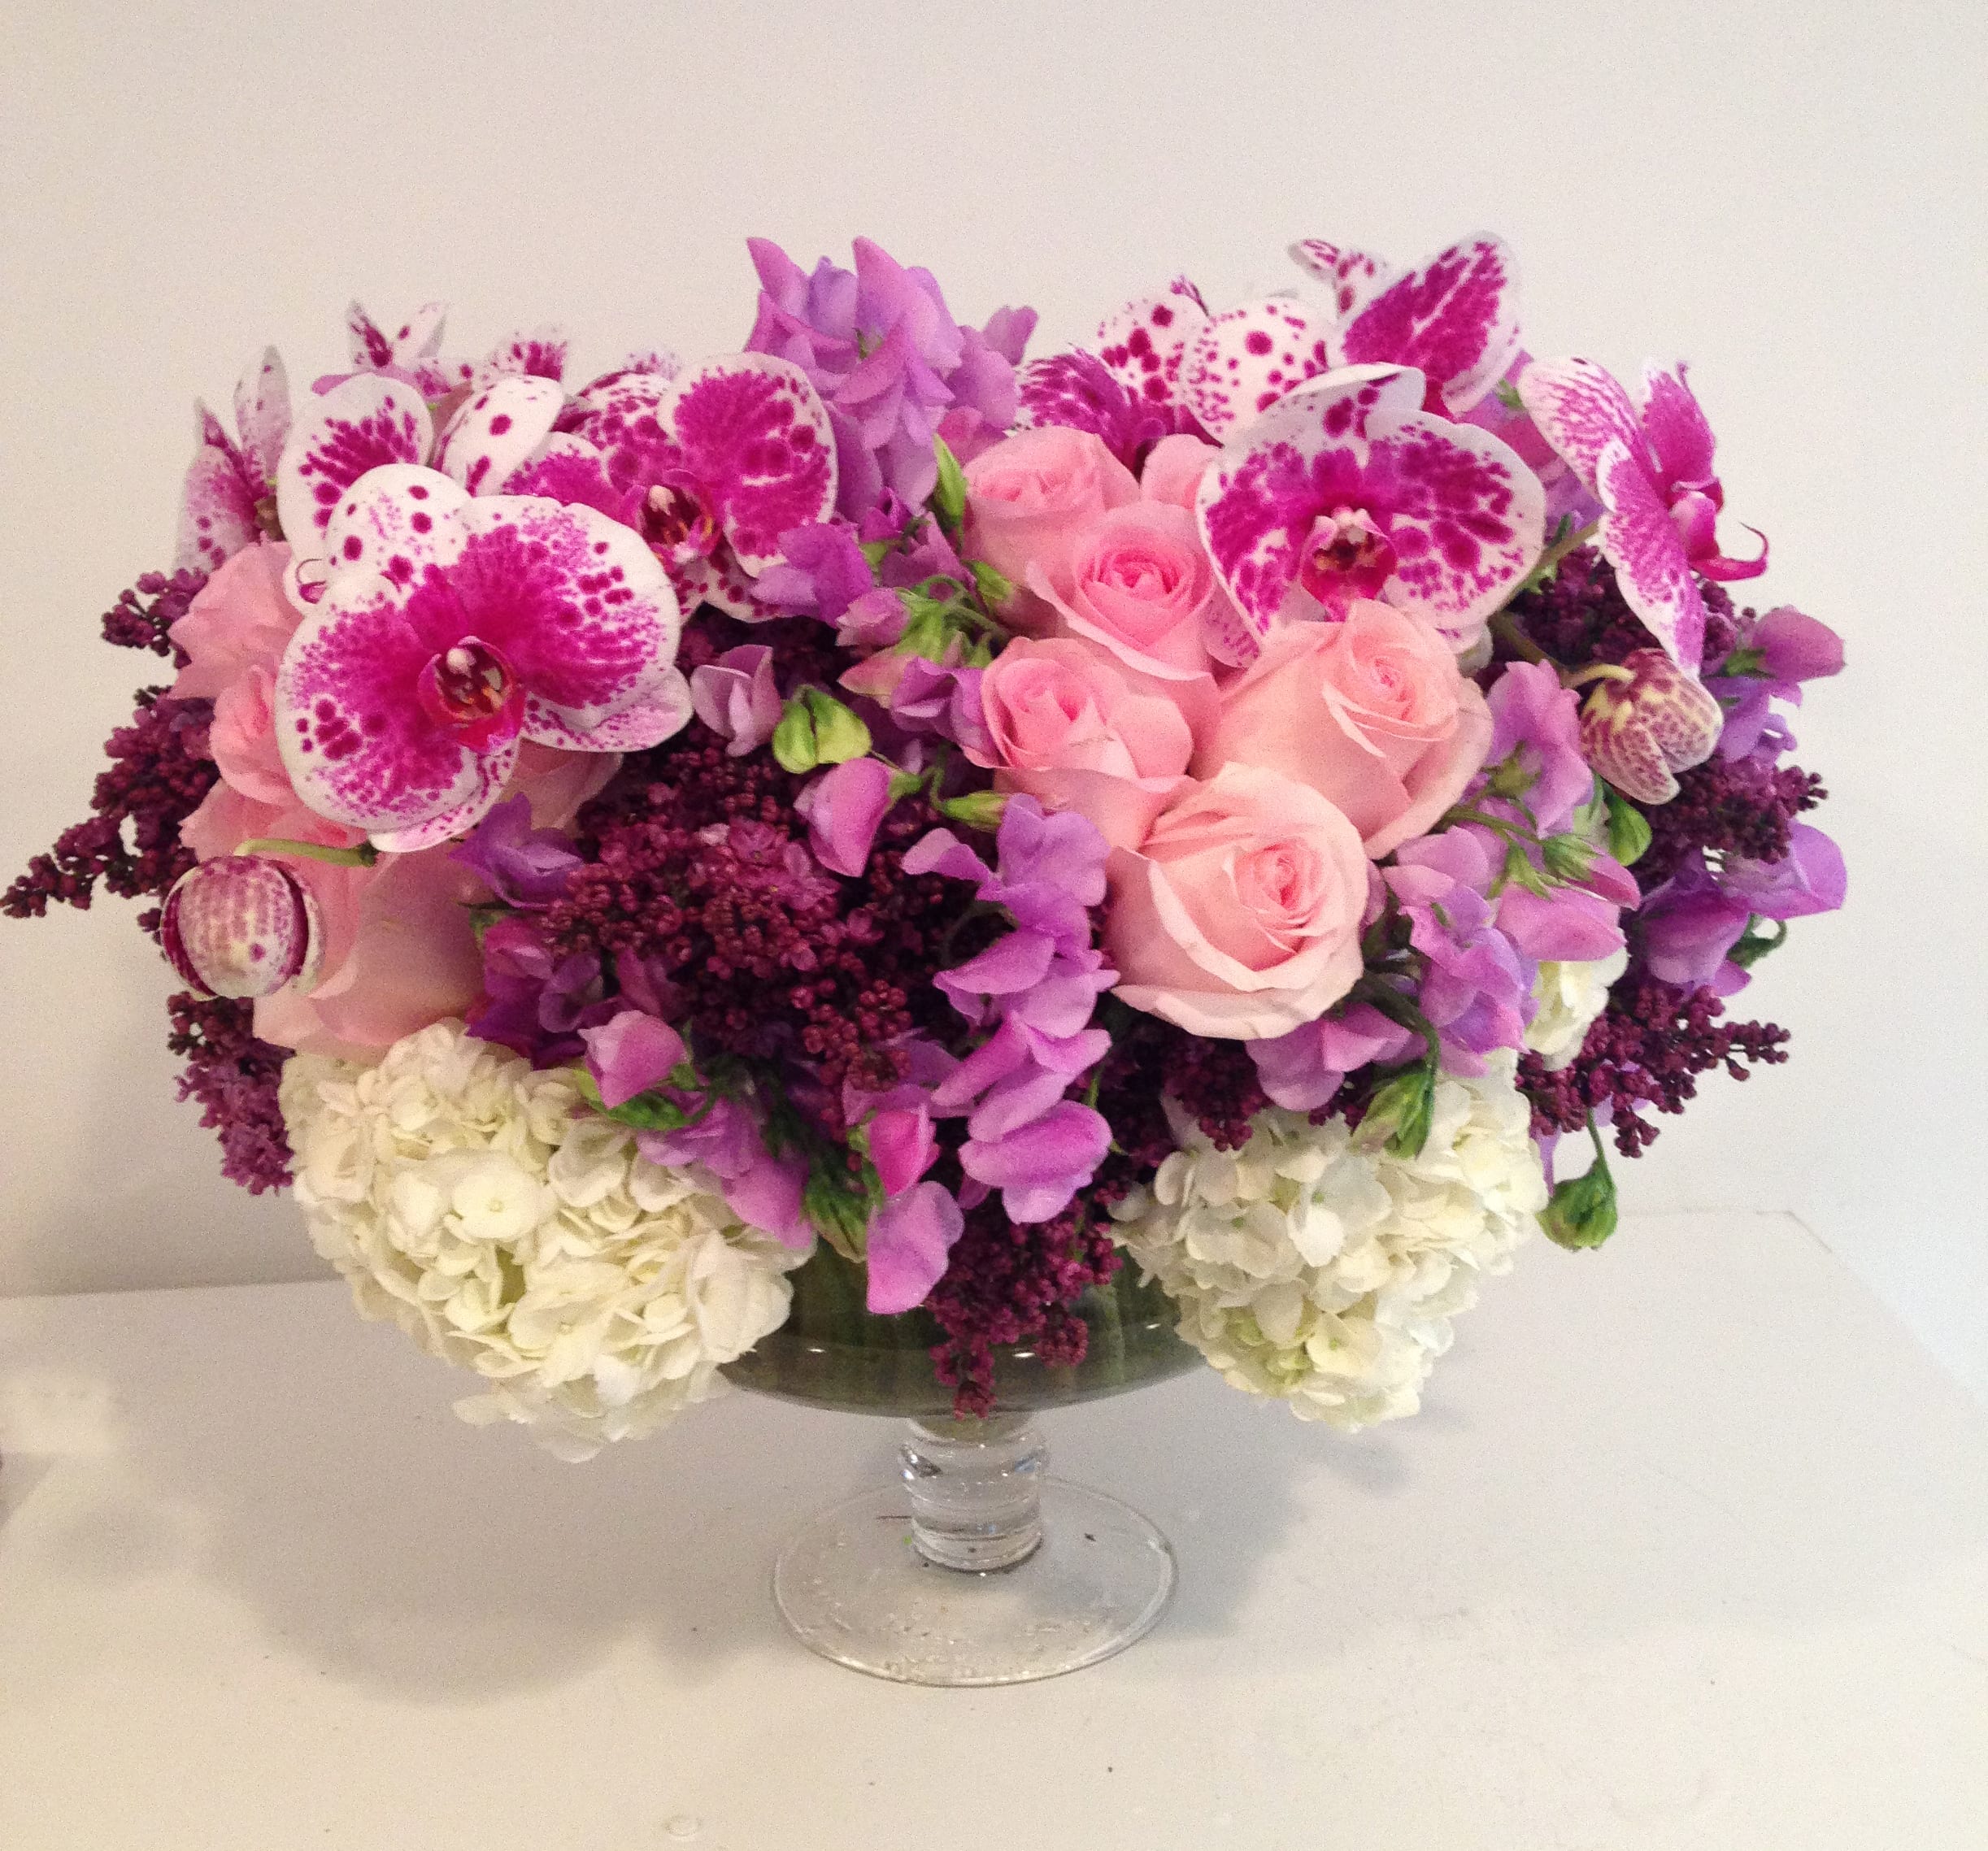 Wisteria Lane - A lush array of roses, sweet pea, phalaenopsis orchids, and lilacs in shades of pale pinks, deep purples, and lavender in a decorative pedestal glass vase. This is a fragrant and very boutique arrangement that is full of seasonal flowers, please allow at least one day for delivery.  *vase subject to availability